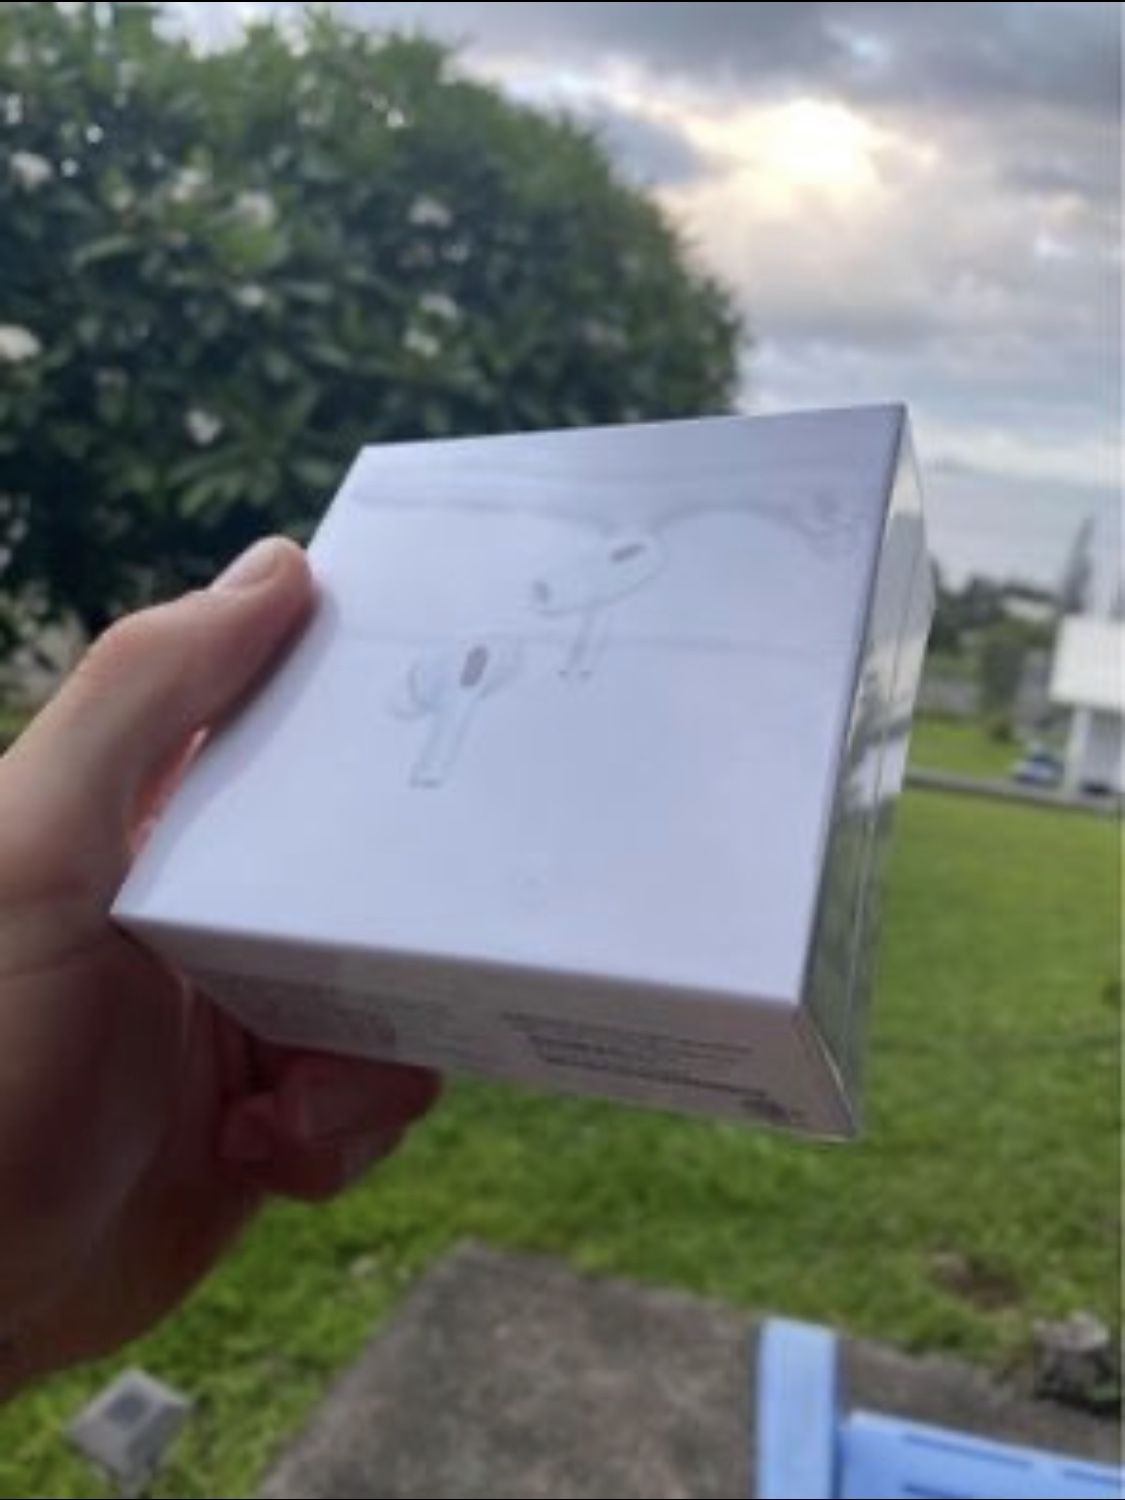 Apple Airpods pro 2nd generation 